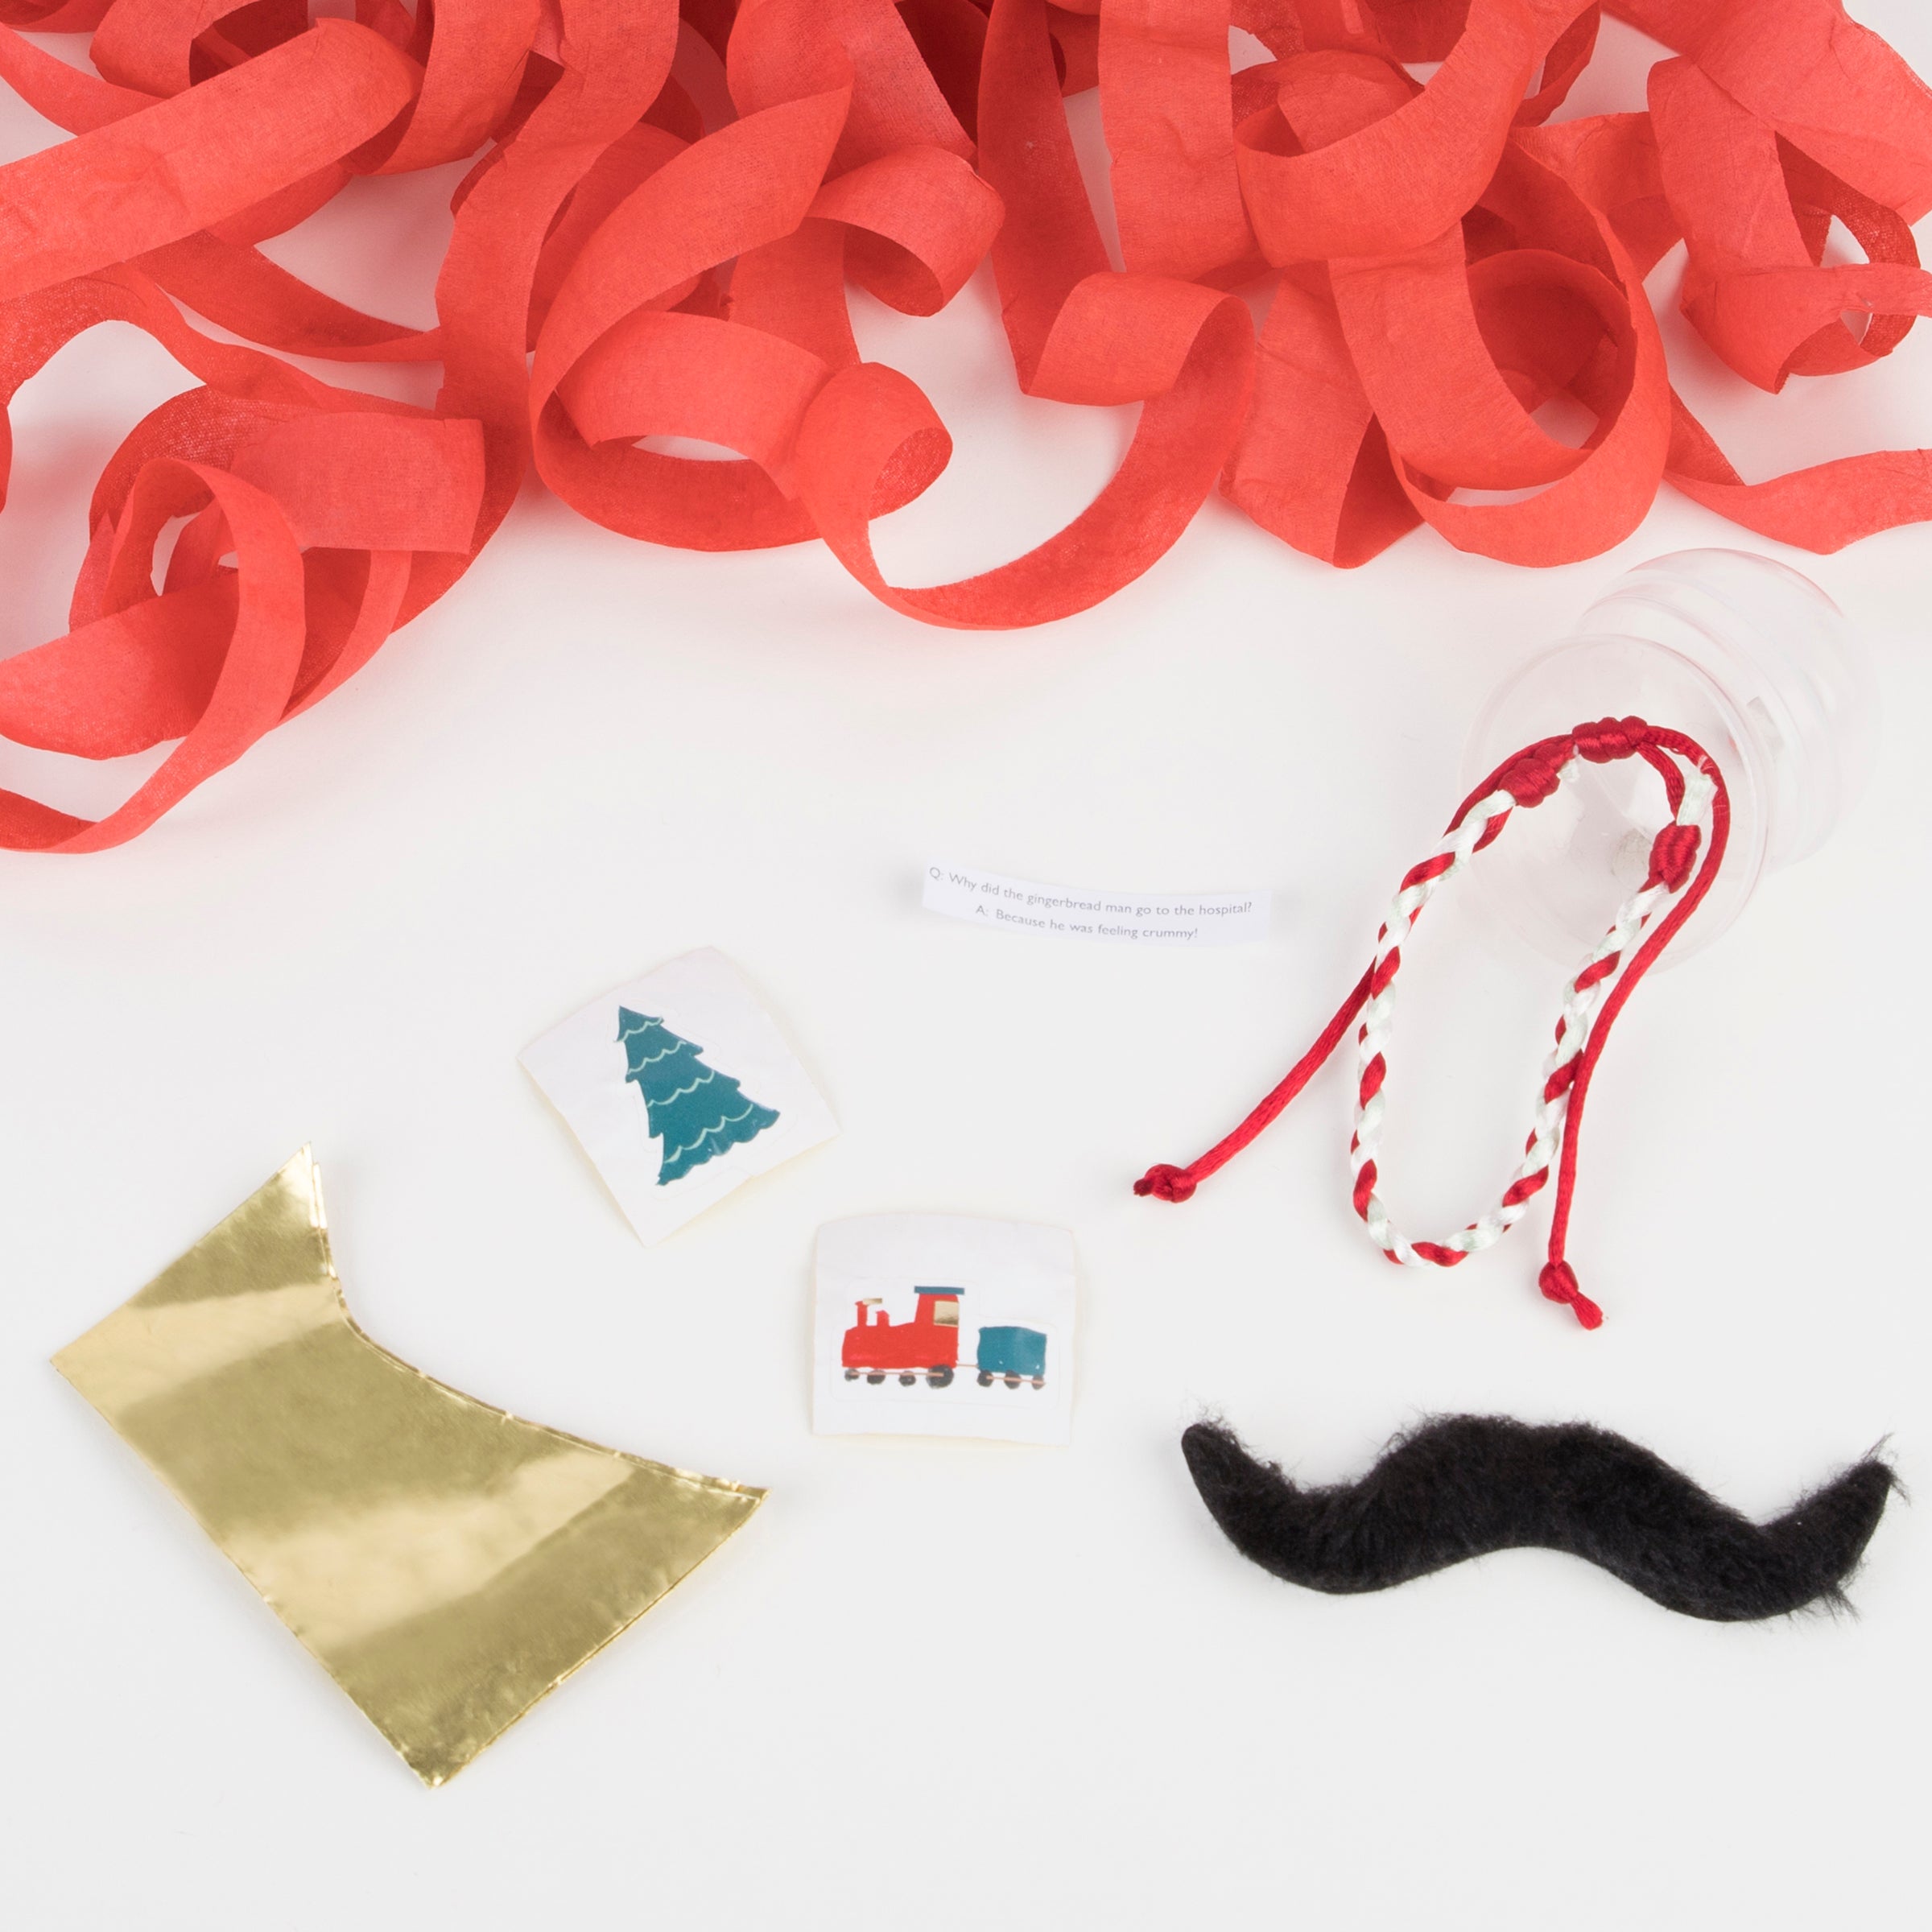 These are filled with gold party hats, friendship bracelets, jokes, stickers and self adhesive moustaches.